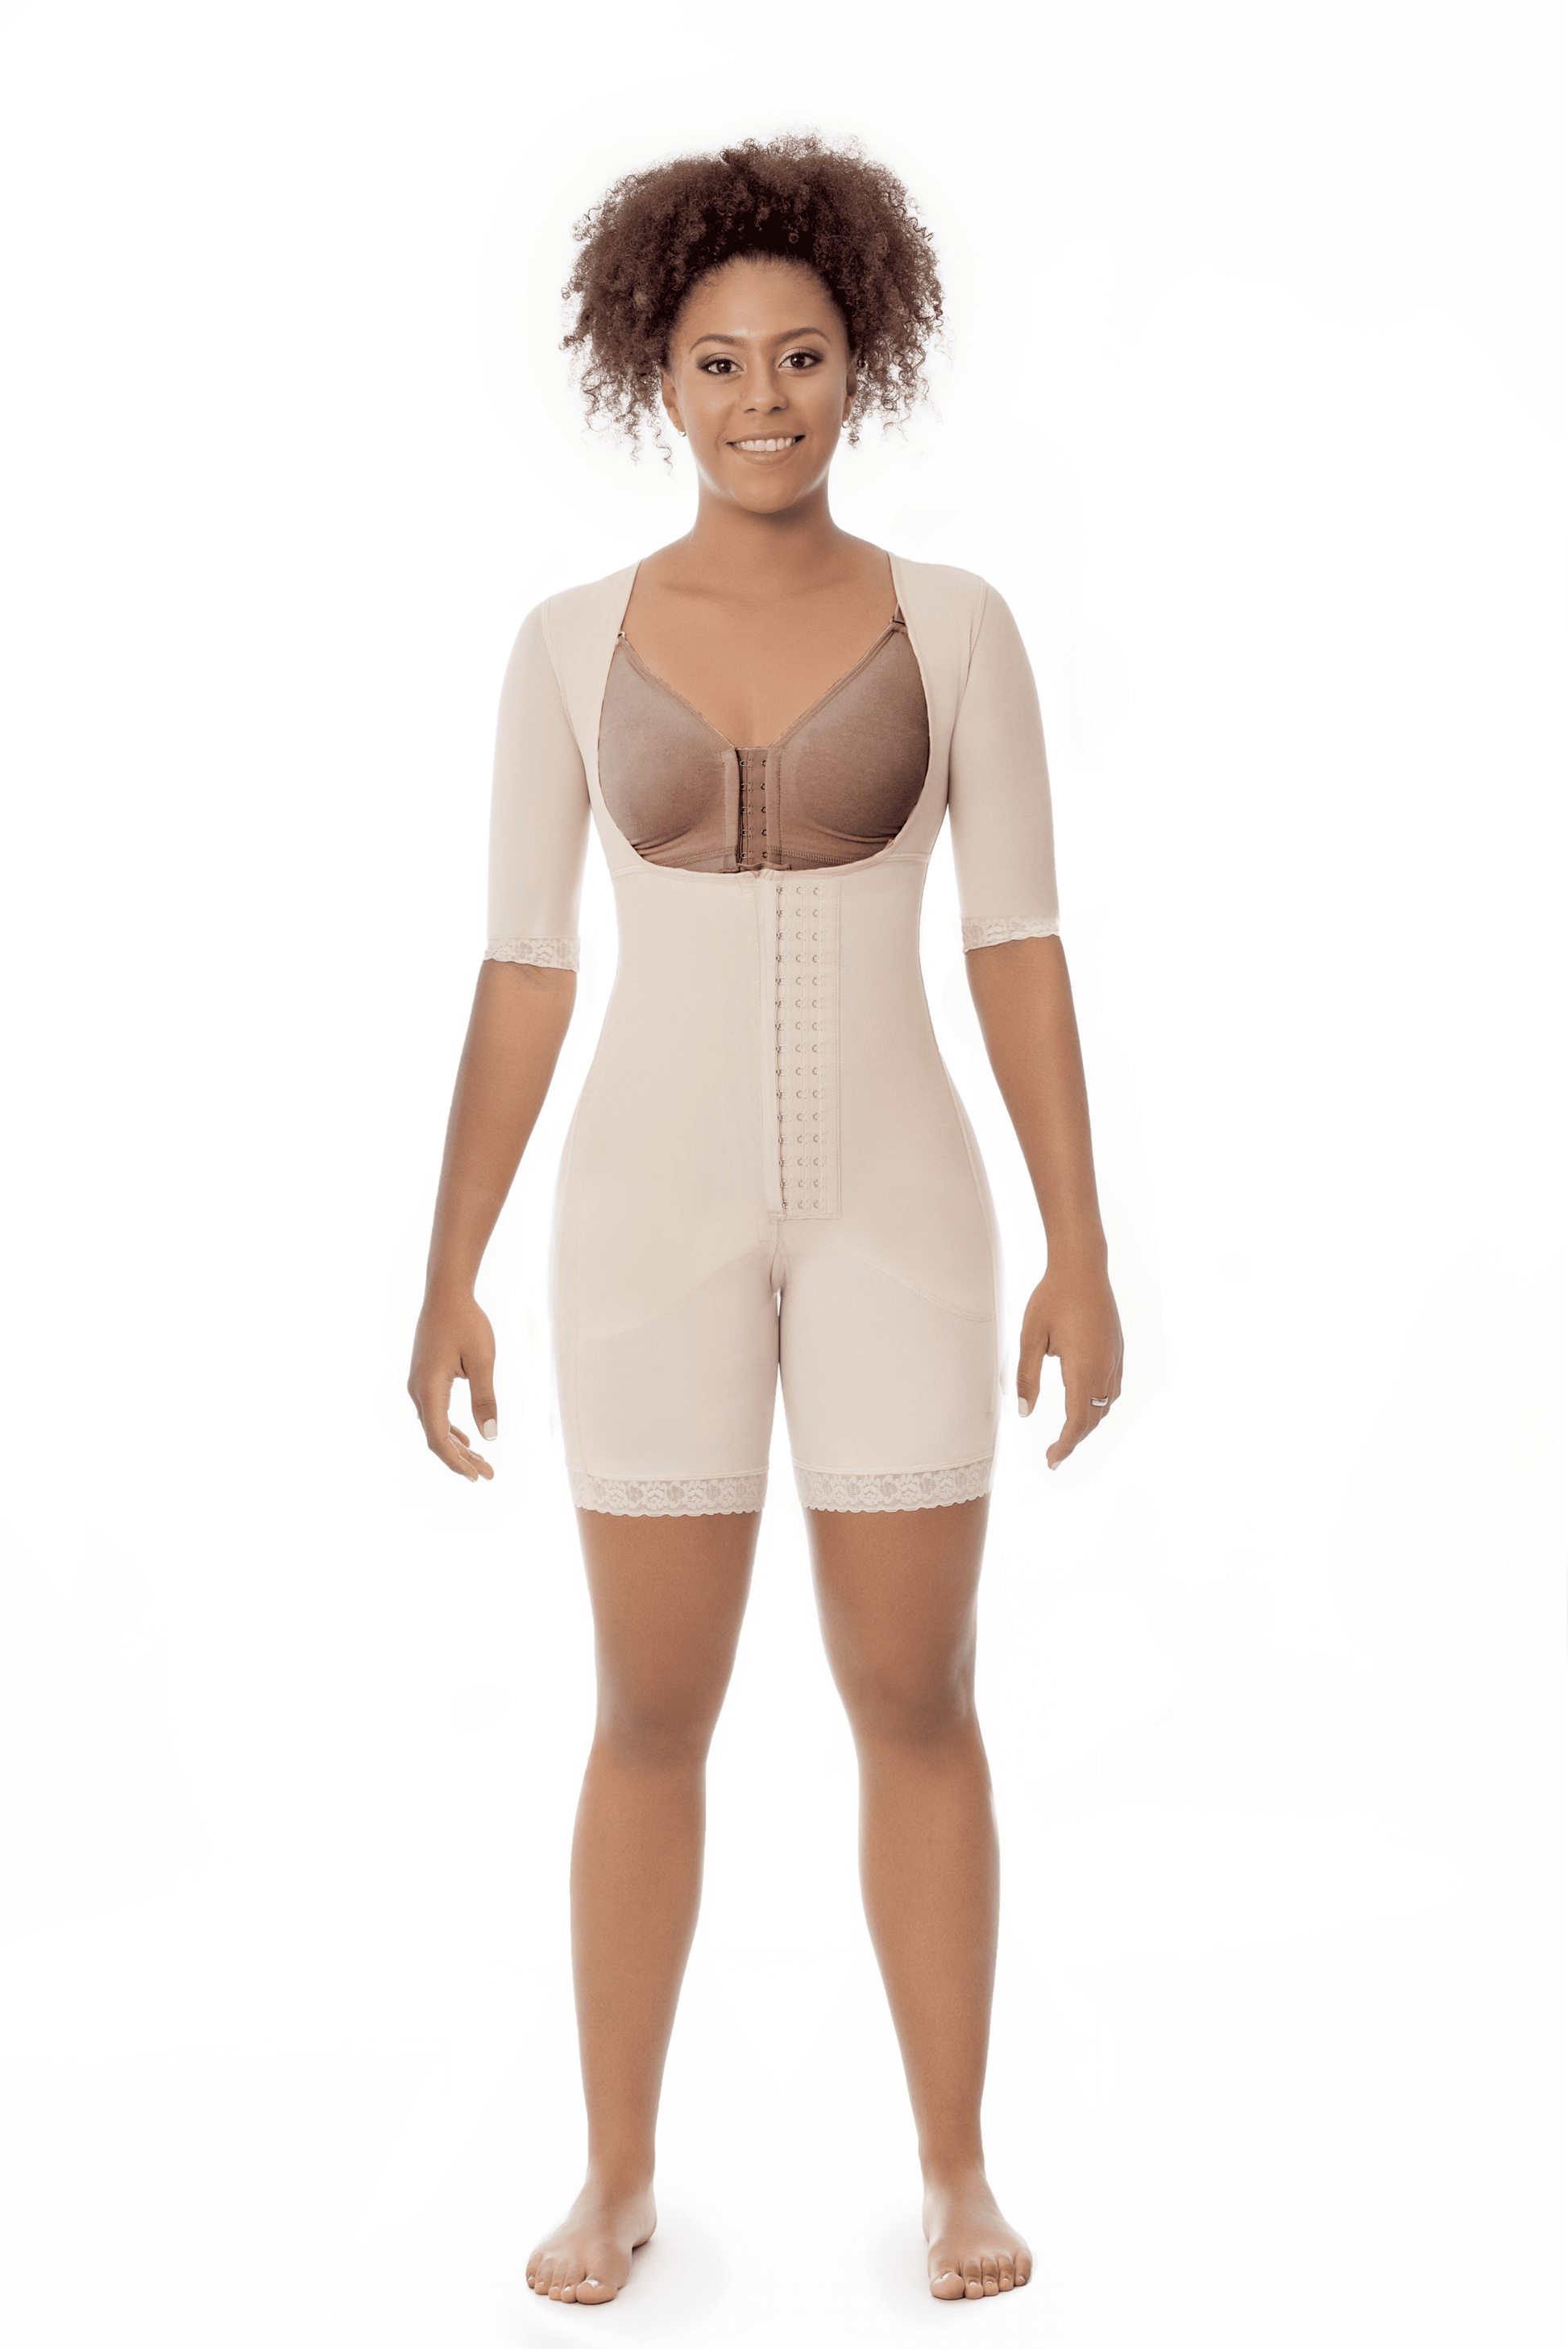 11522 - STAGE 2 BRALESS FULL BODY MID THIGH FAJA WITH SLEEVES – MSContours